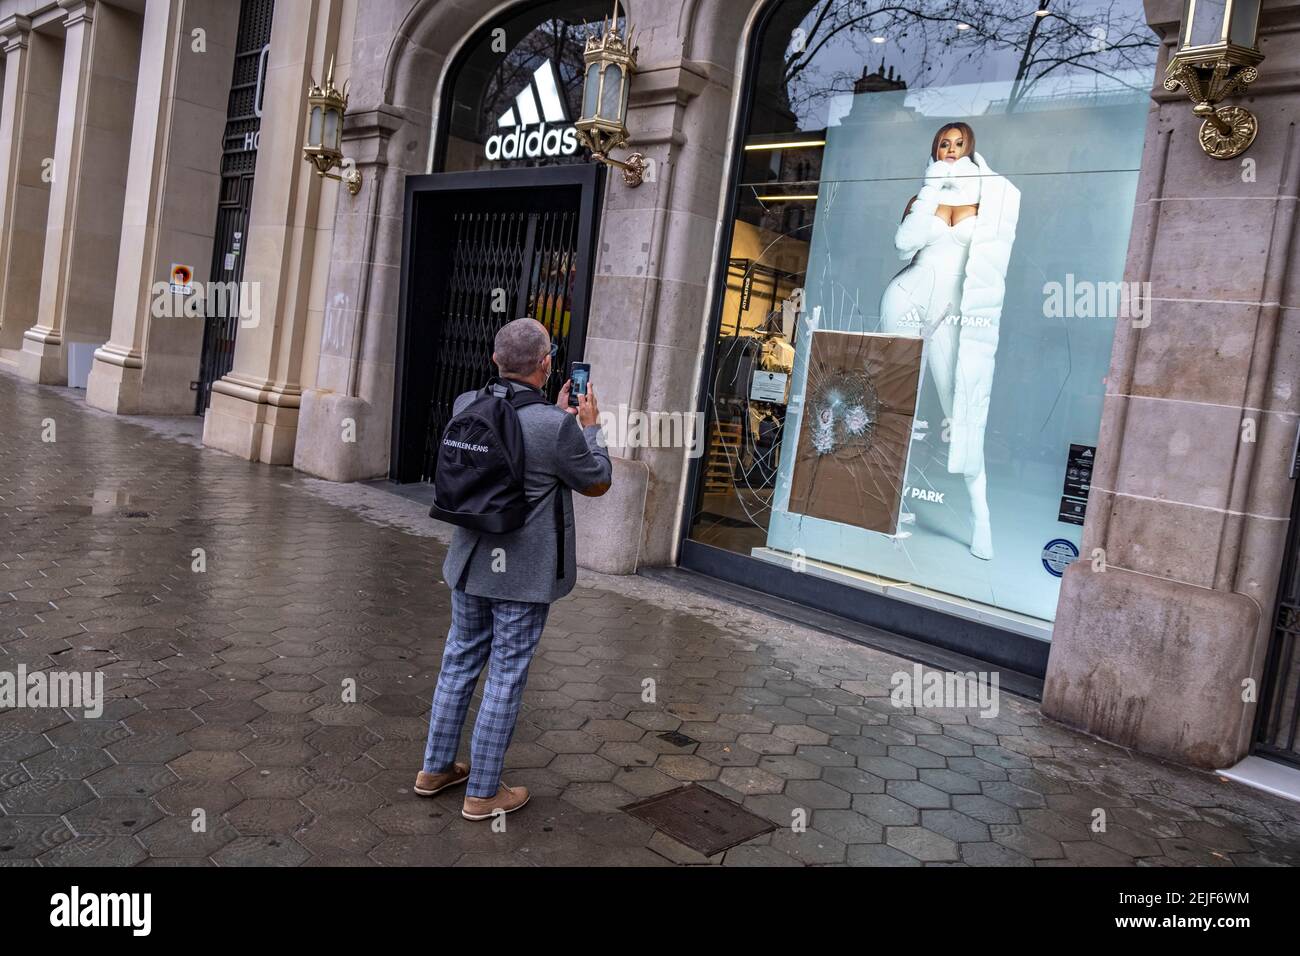 Barcelona, Spain. 22nd Feb, 2021. A man is seen taking photos of the damage  to the Adidas store in Passeig de Gràcia.More than 50 stores have suffered  damage to their shop windows